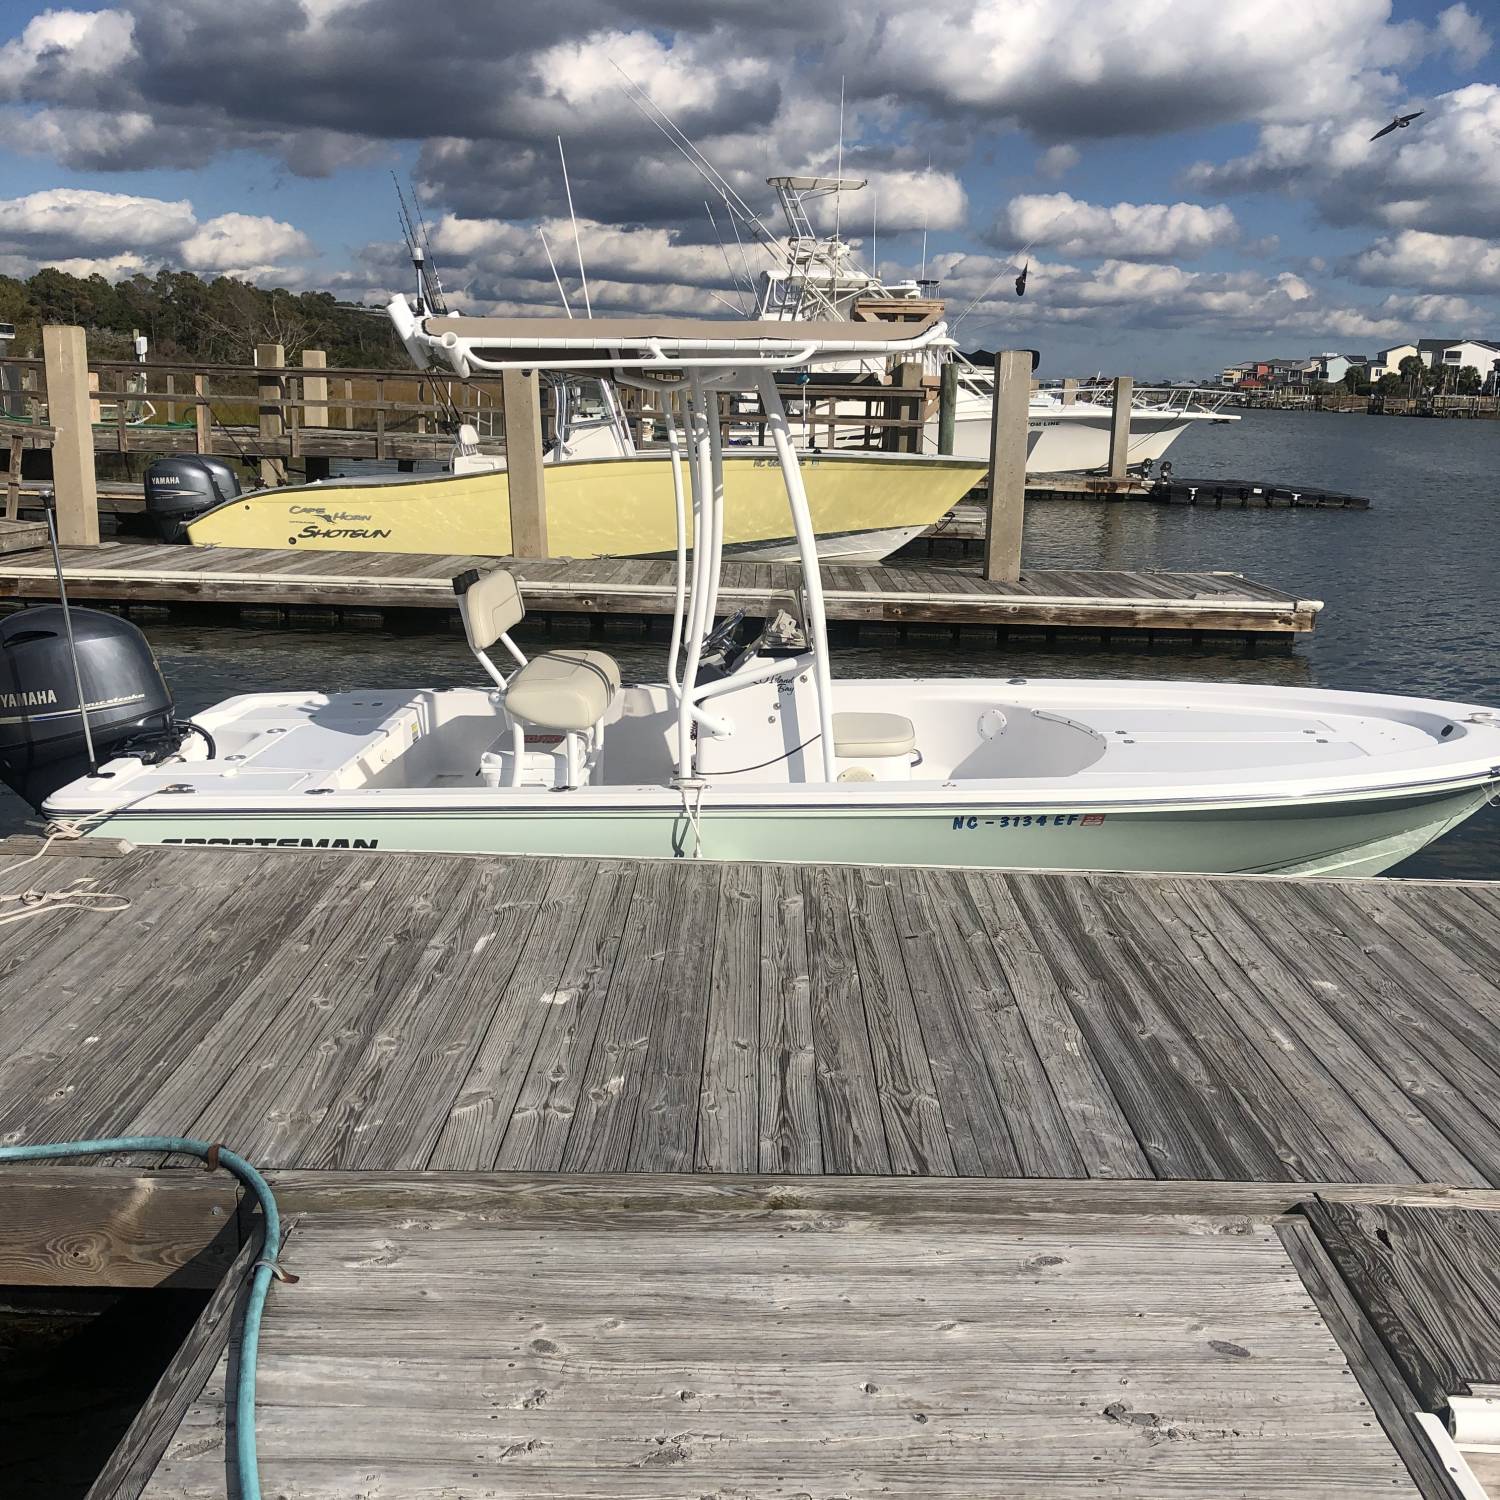 Title: Marina day - On board their Sportsman Masters 227 Bay Boat - Location: Holden Beach Marina NC. Participating in the Photo Contest #SportsmanFebruary2022